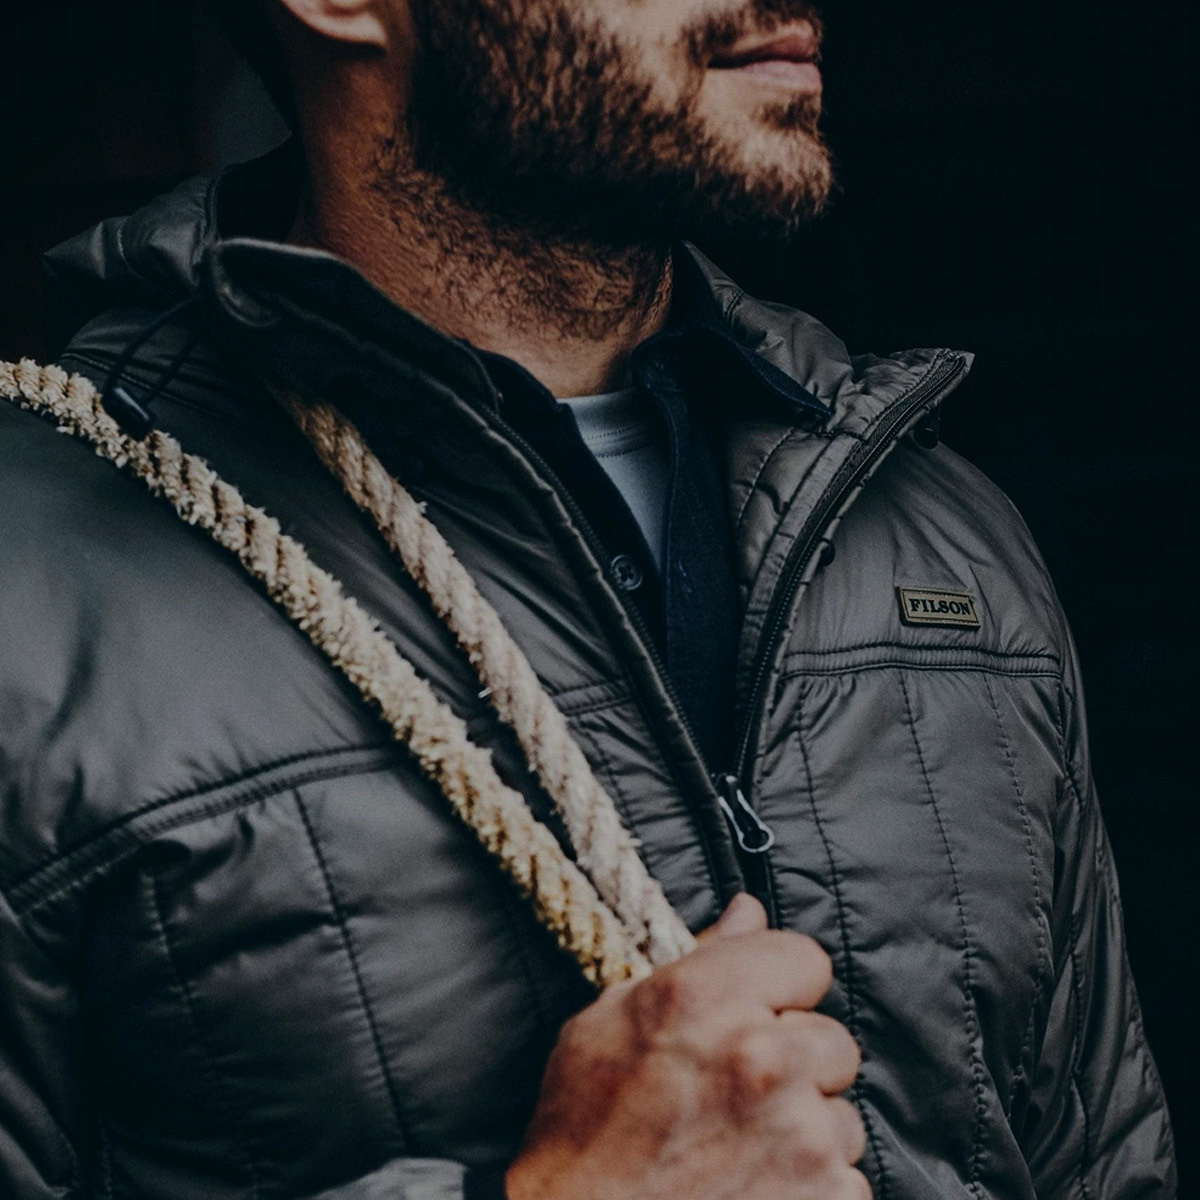 Filson Ultralight Hooded Jacket Black, perfect as an outer layer or underneath a heavy jacket for warmth in extreme cold